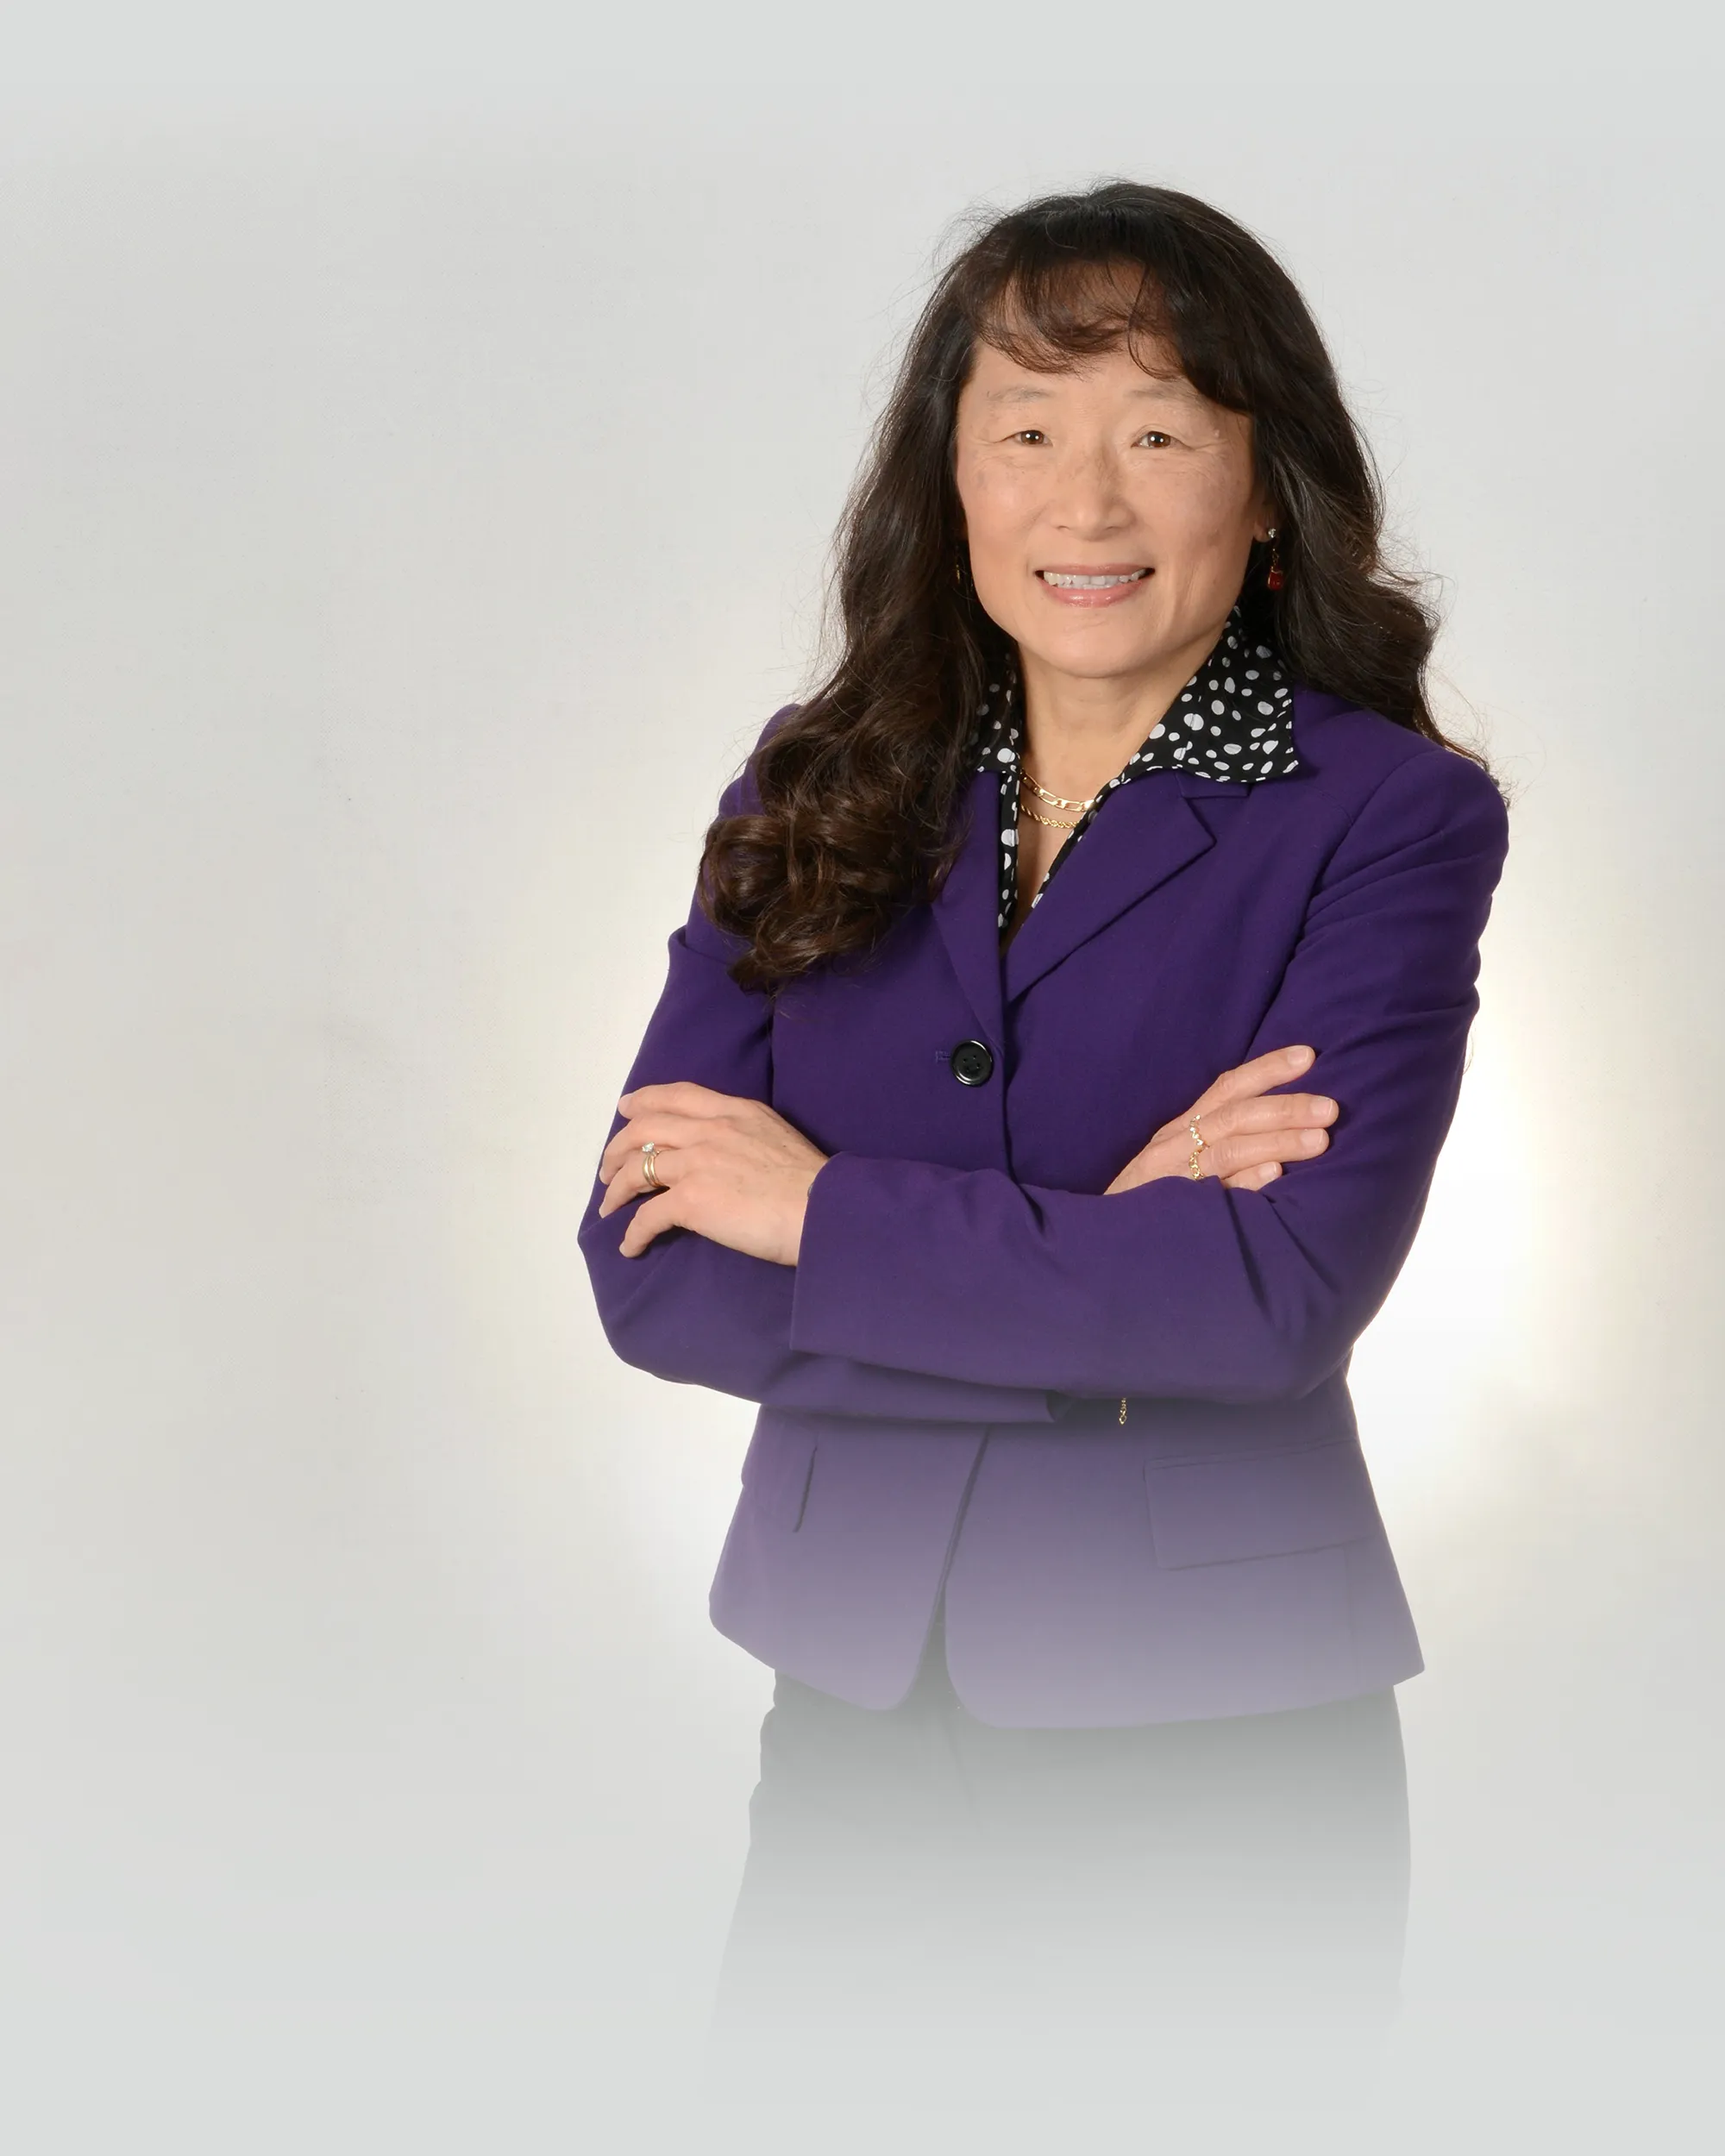 Kristie Wang wearing a purple blazer with her arms crossed and smiling